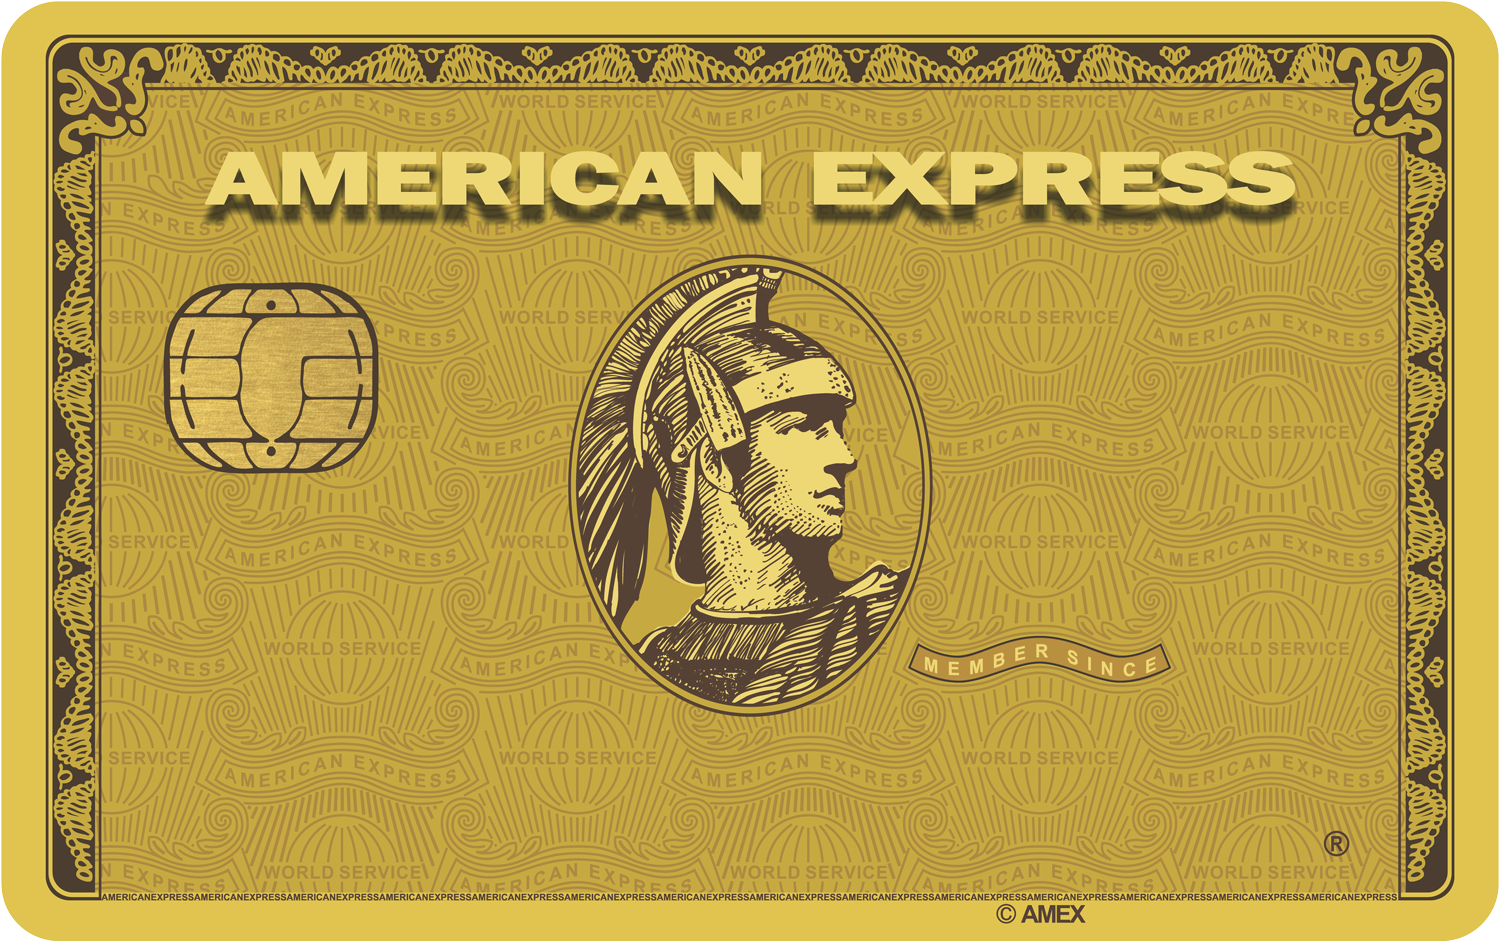 The American Express Gold Card